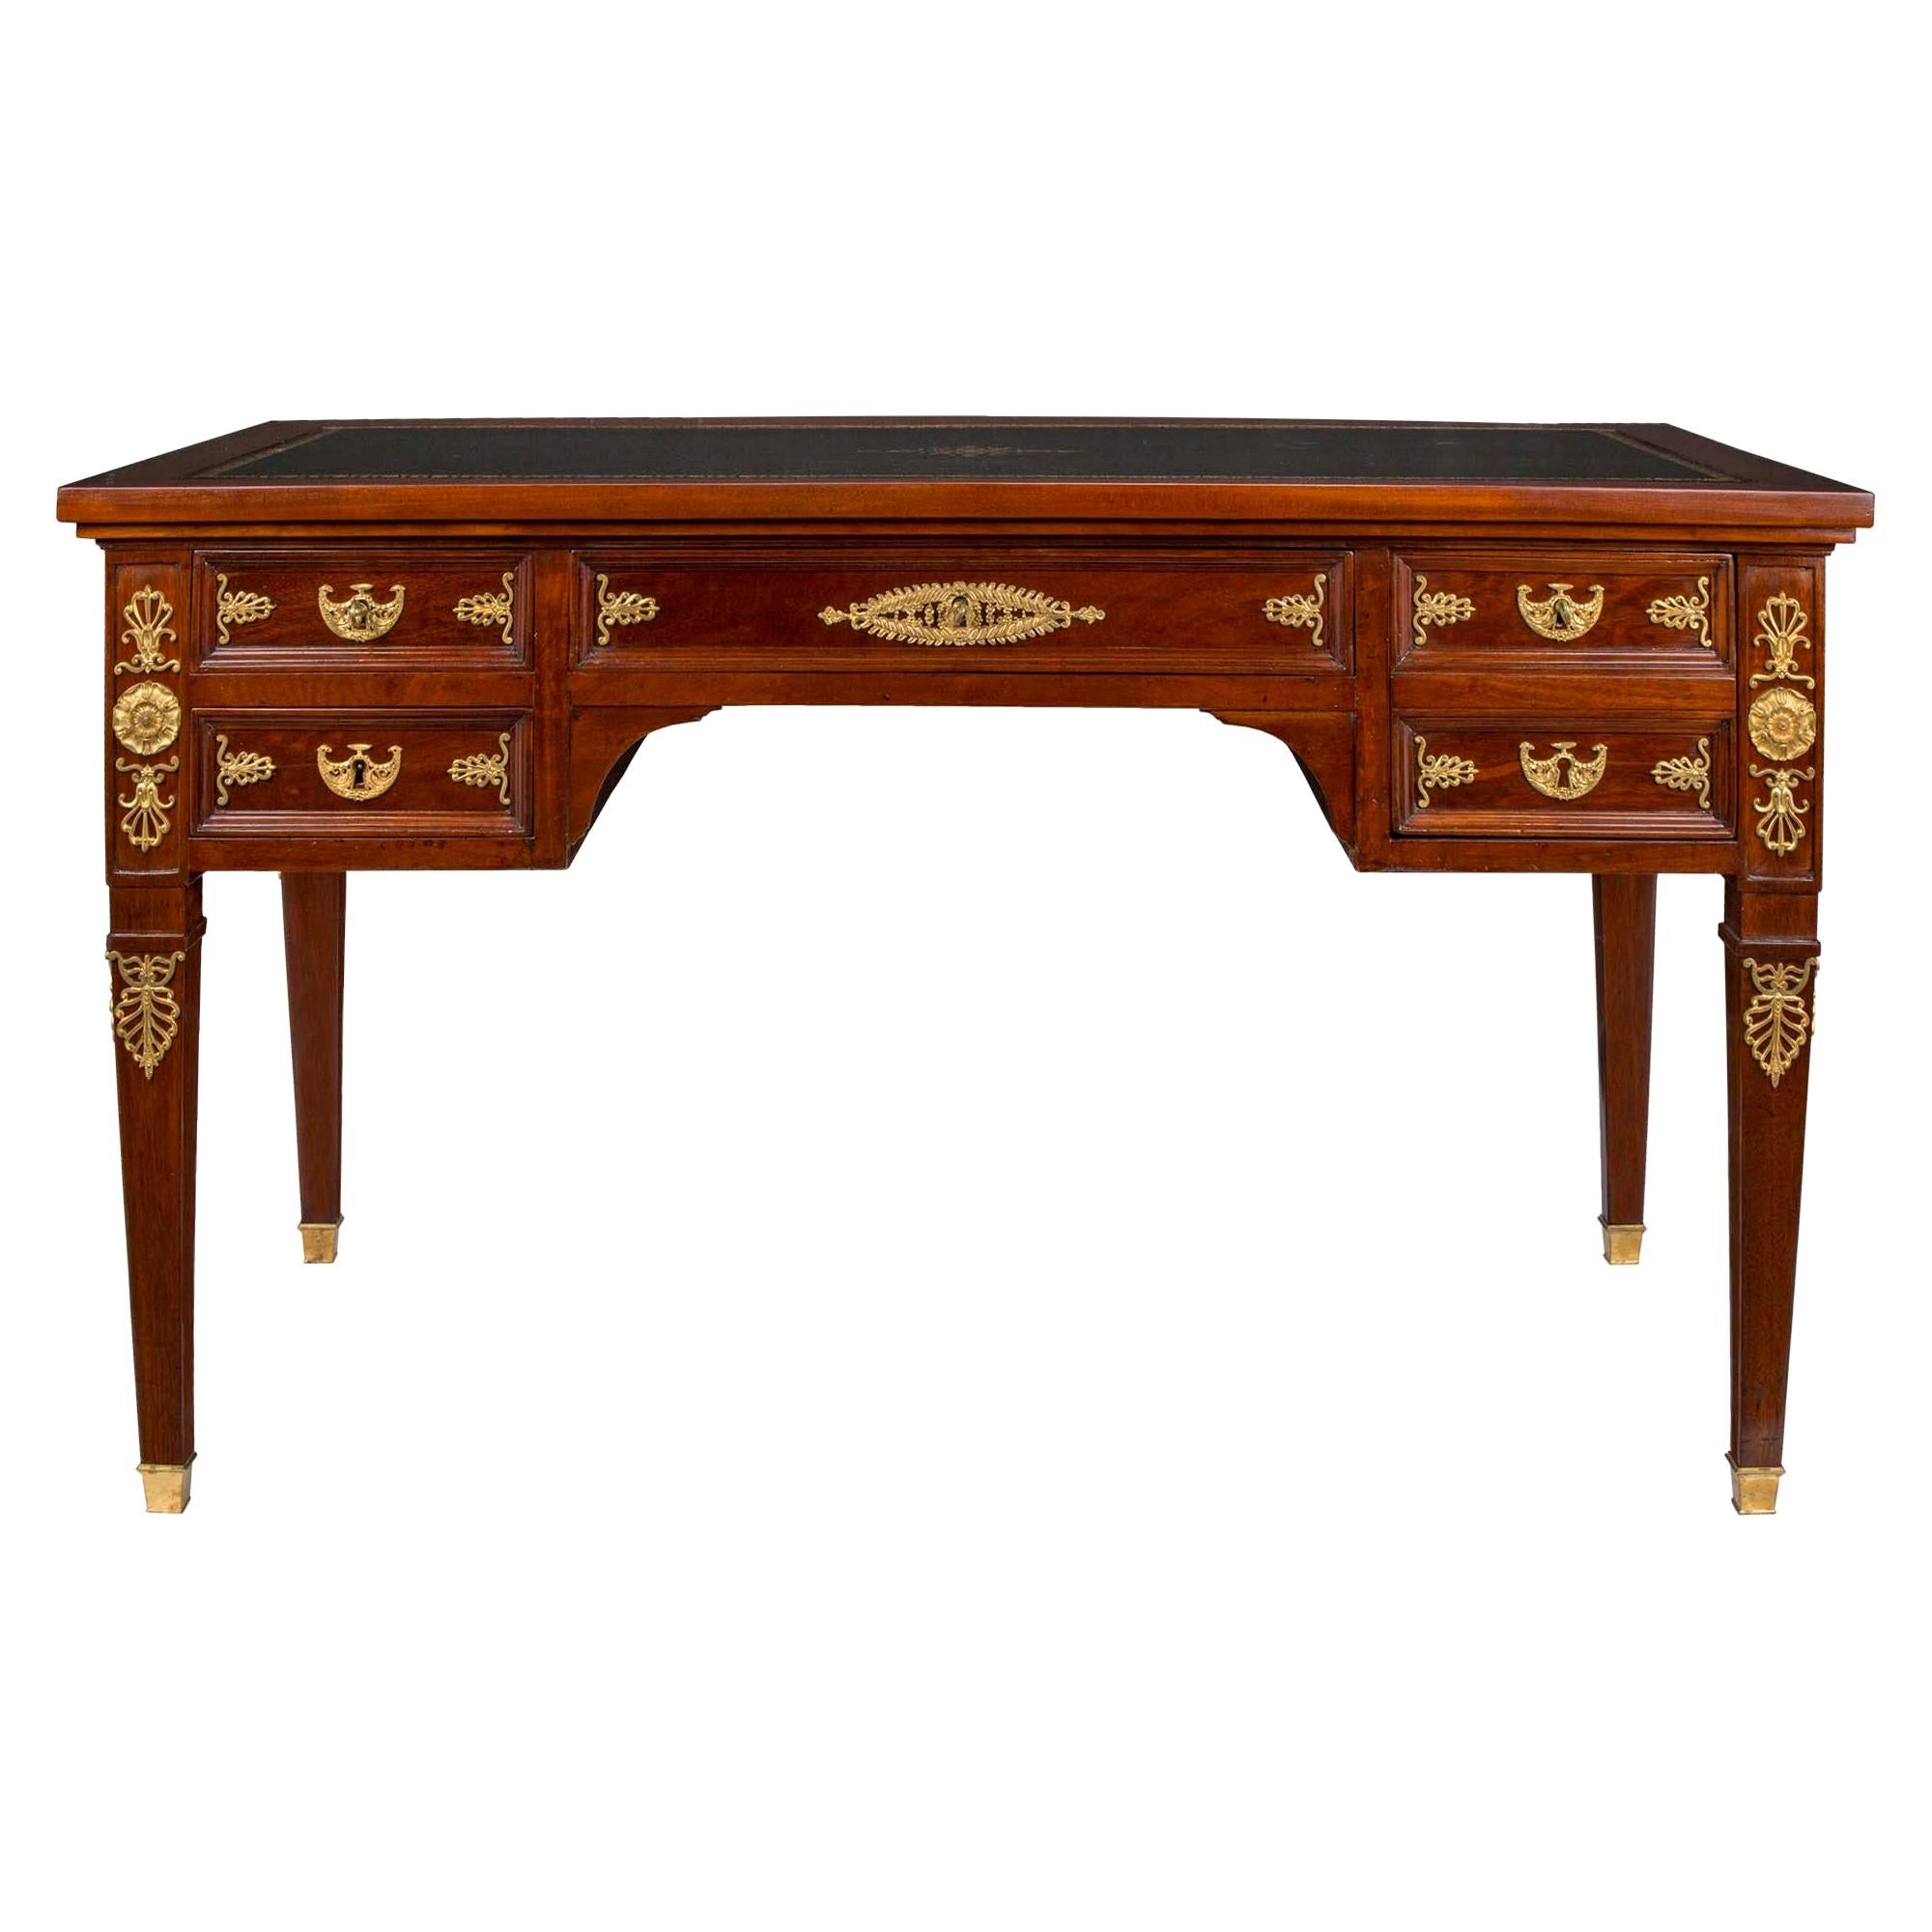 French 19th Century Empire Style Mahogany and Ormolu Bureau Plat For Sale